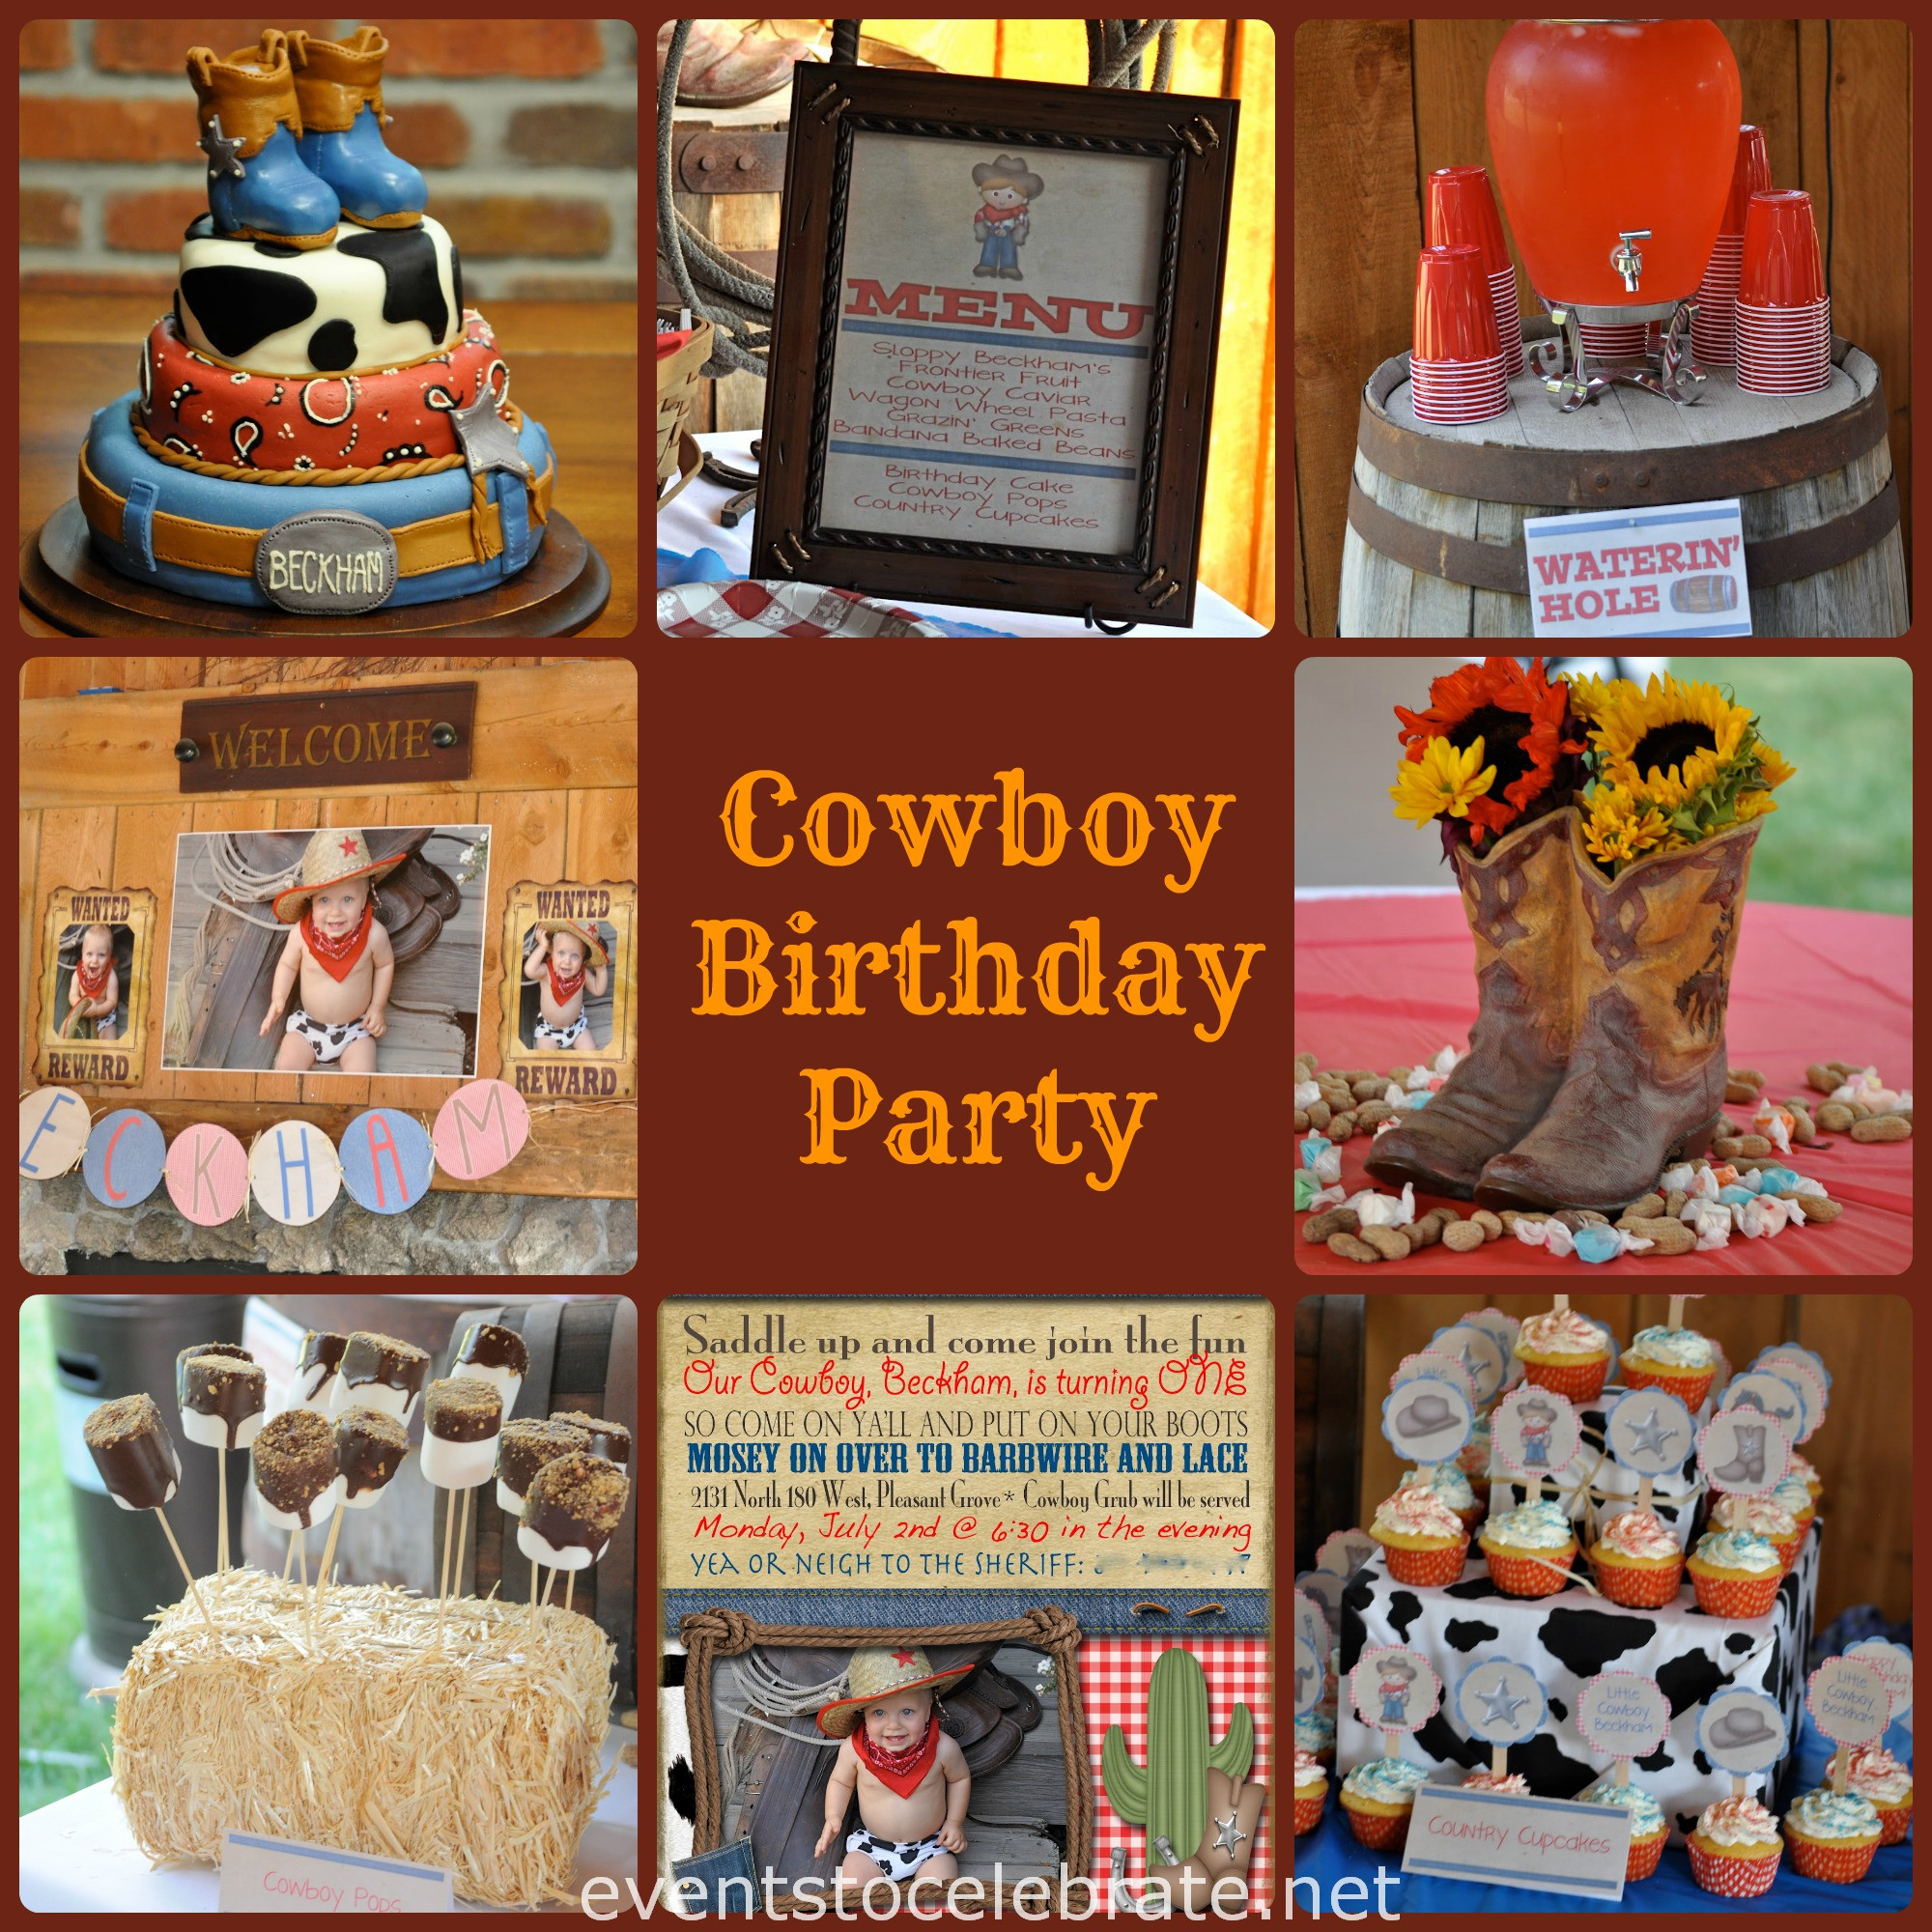 Cowboy Birthday Party Decorations
 cowboy party decorations Archives events to CELEBRATE